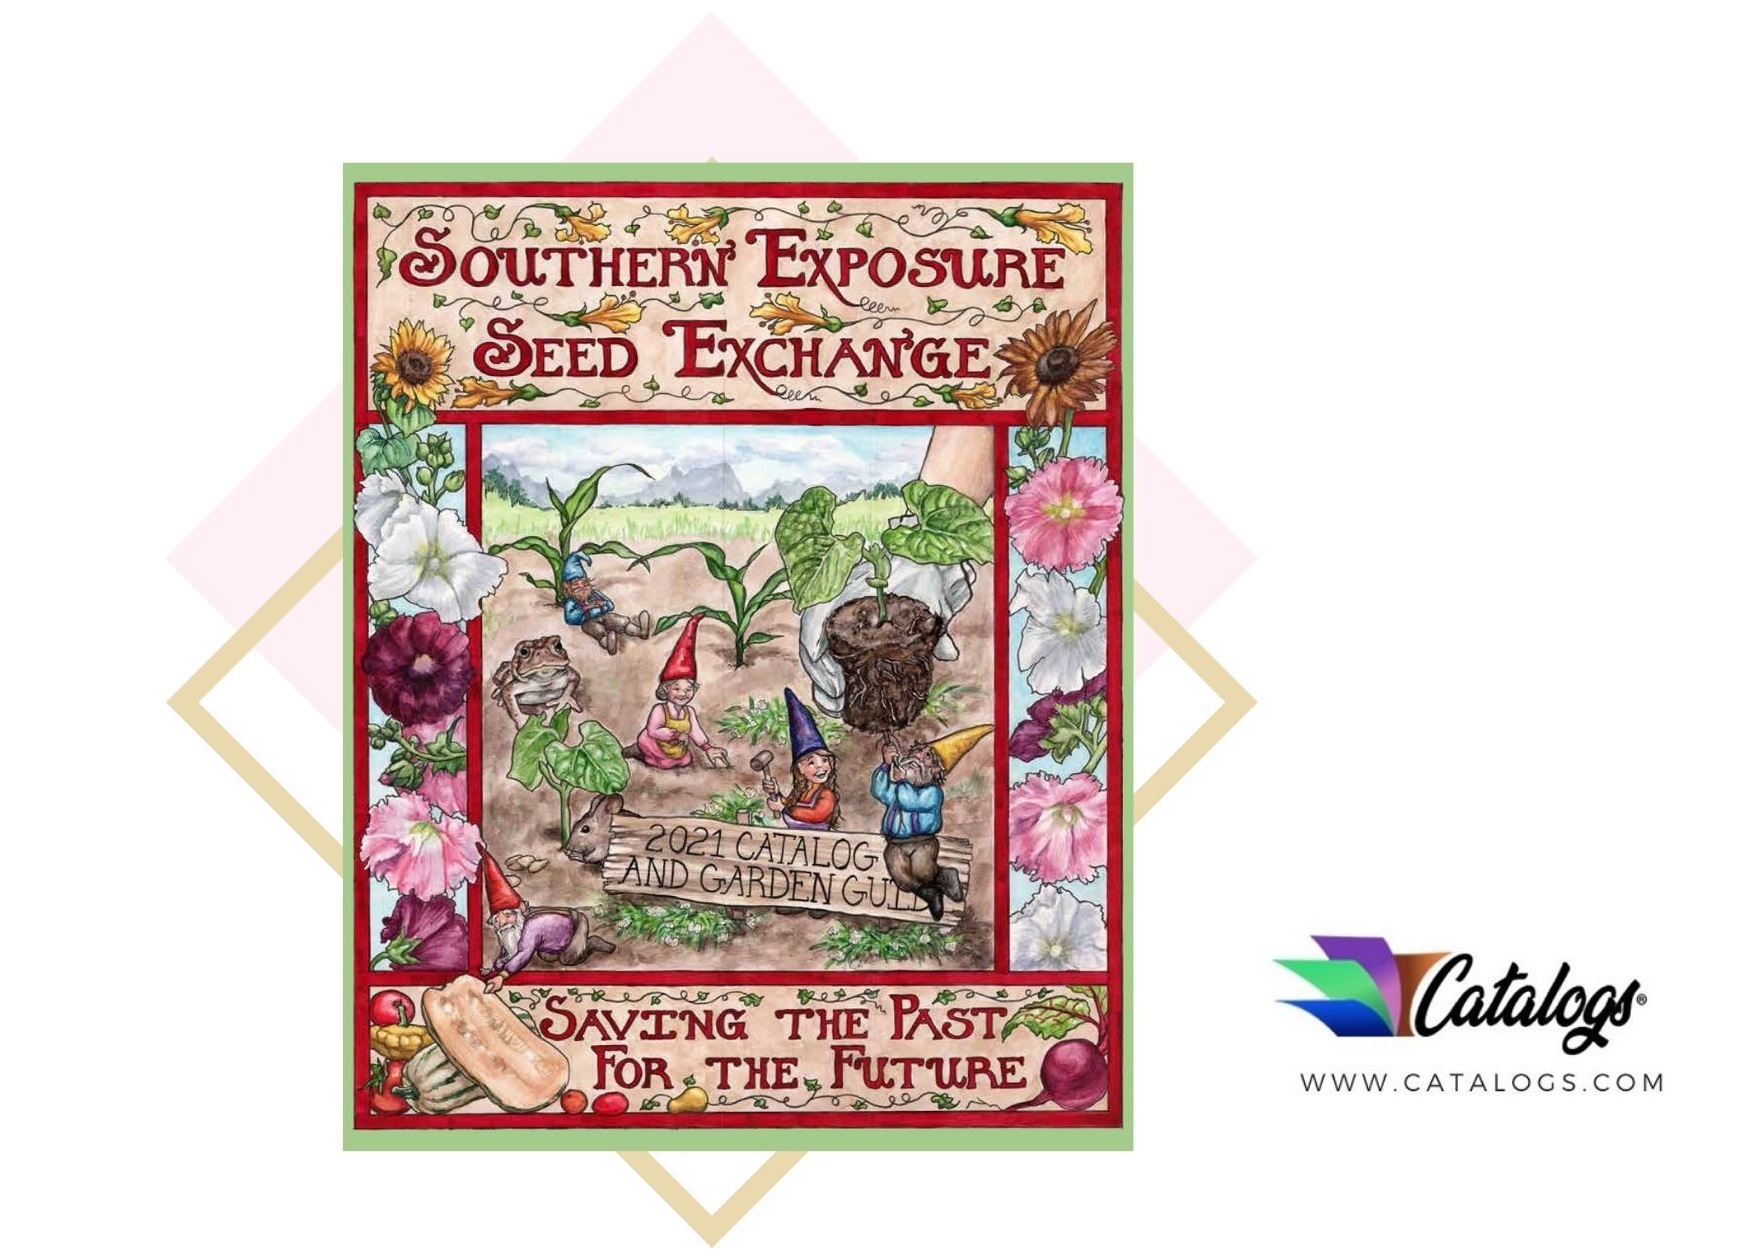 How Do I Order a Free Southern Exposure Seed Exchange Garden Catalog?